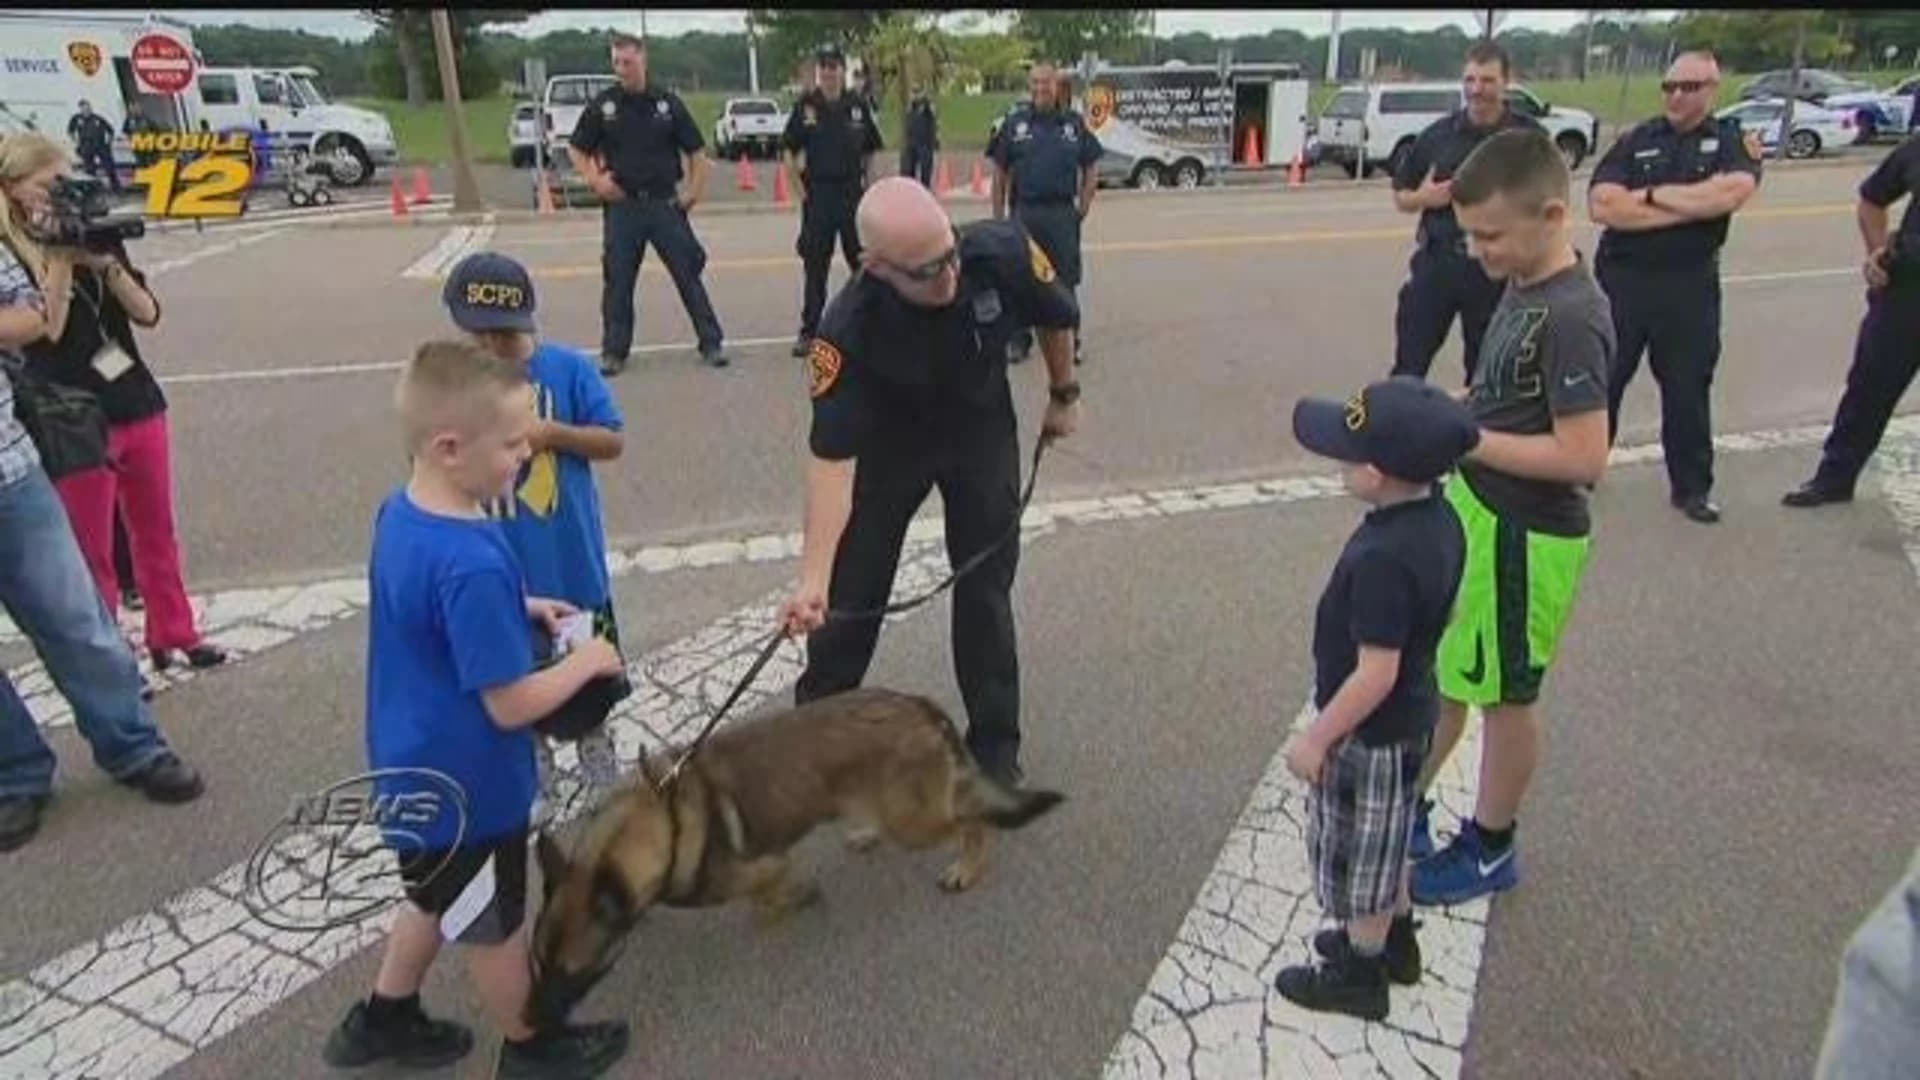 Suffolk PD welcomes 3 special recruits for the day